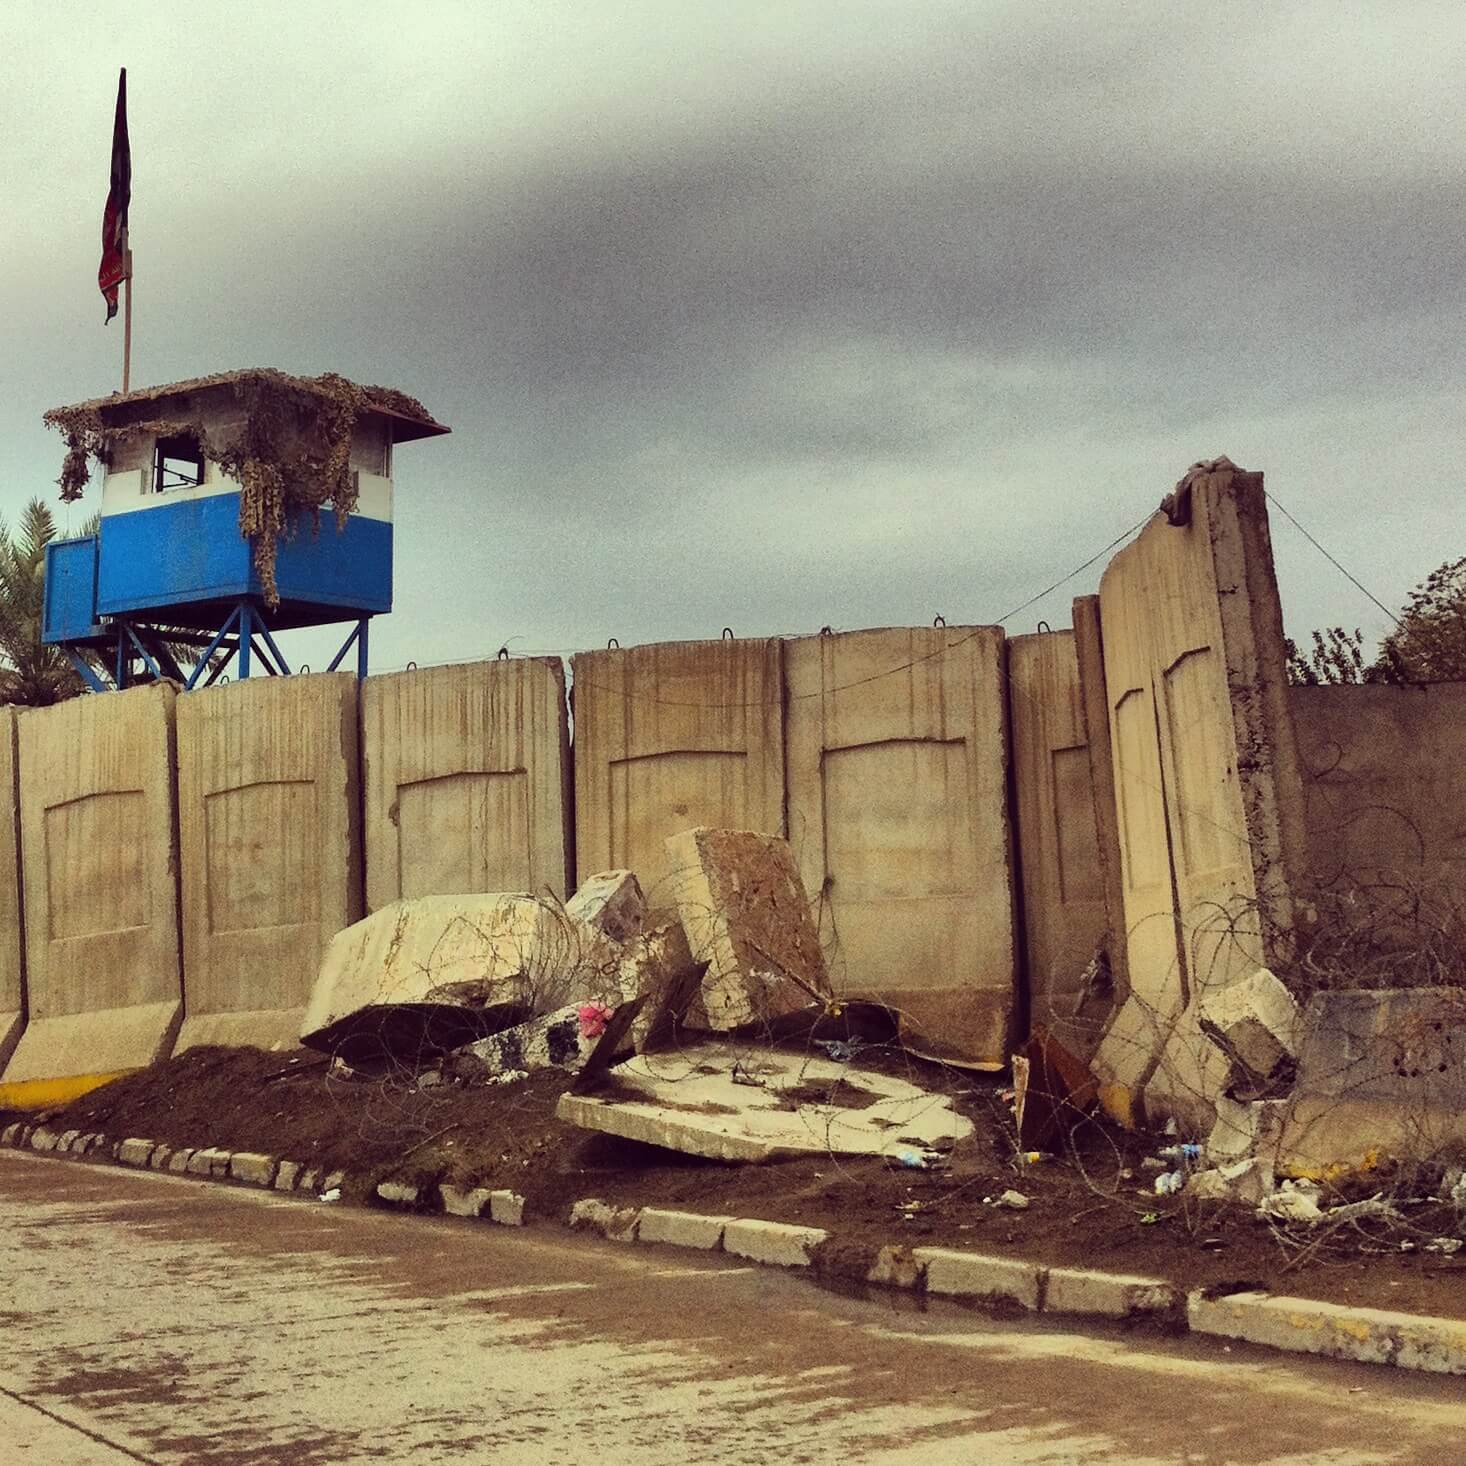 Barricades around the Republican Palace, Baghdad, in 2012.